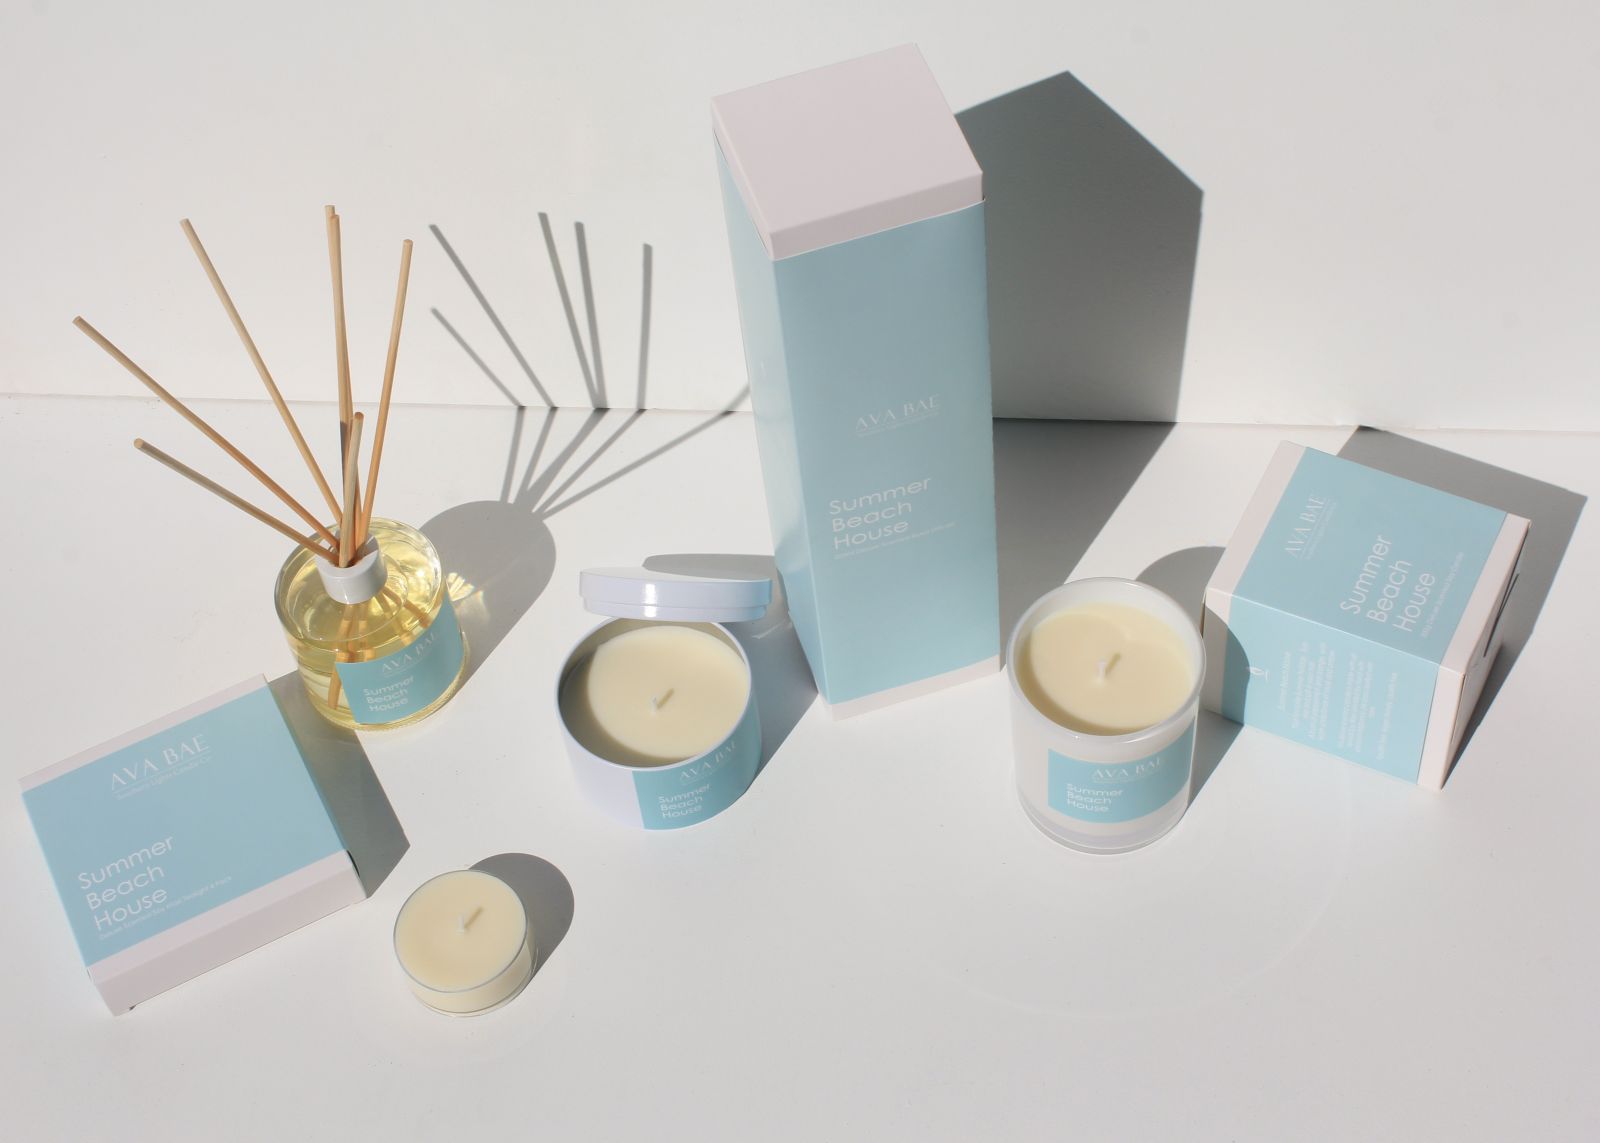 summer beach house home fragrance range with scented candles and reed diffuser in aqua blue